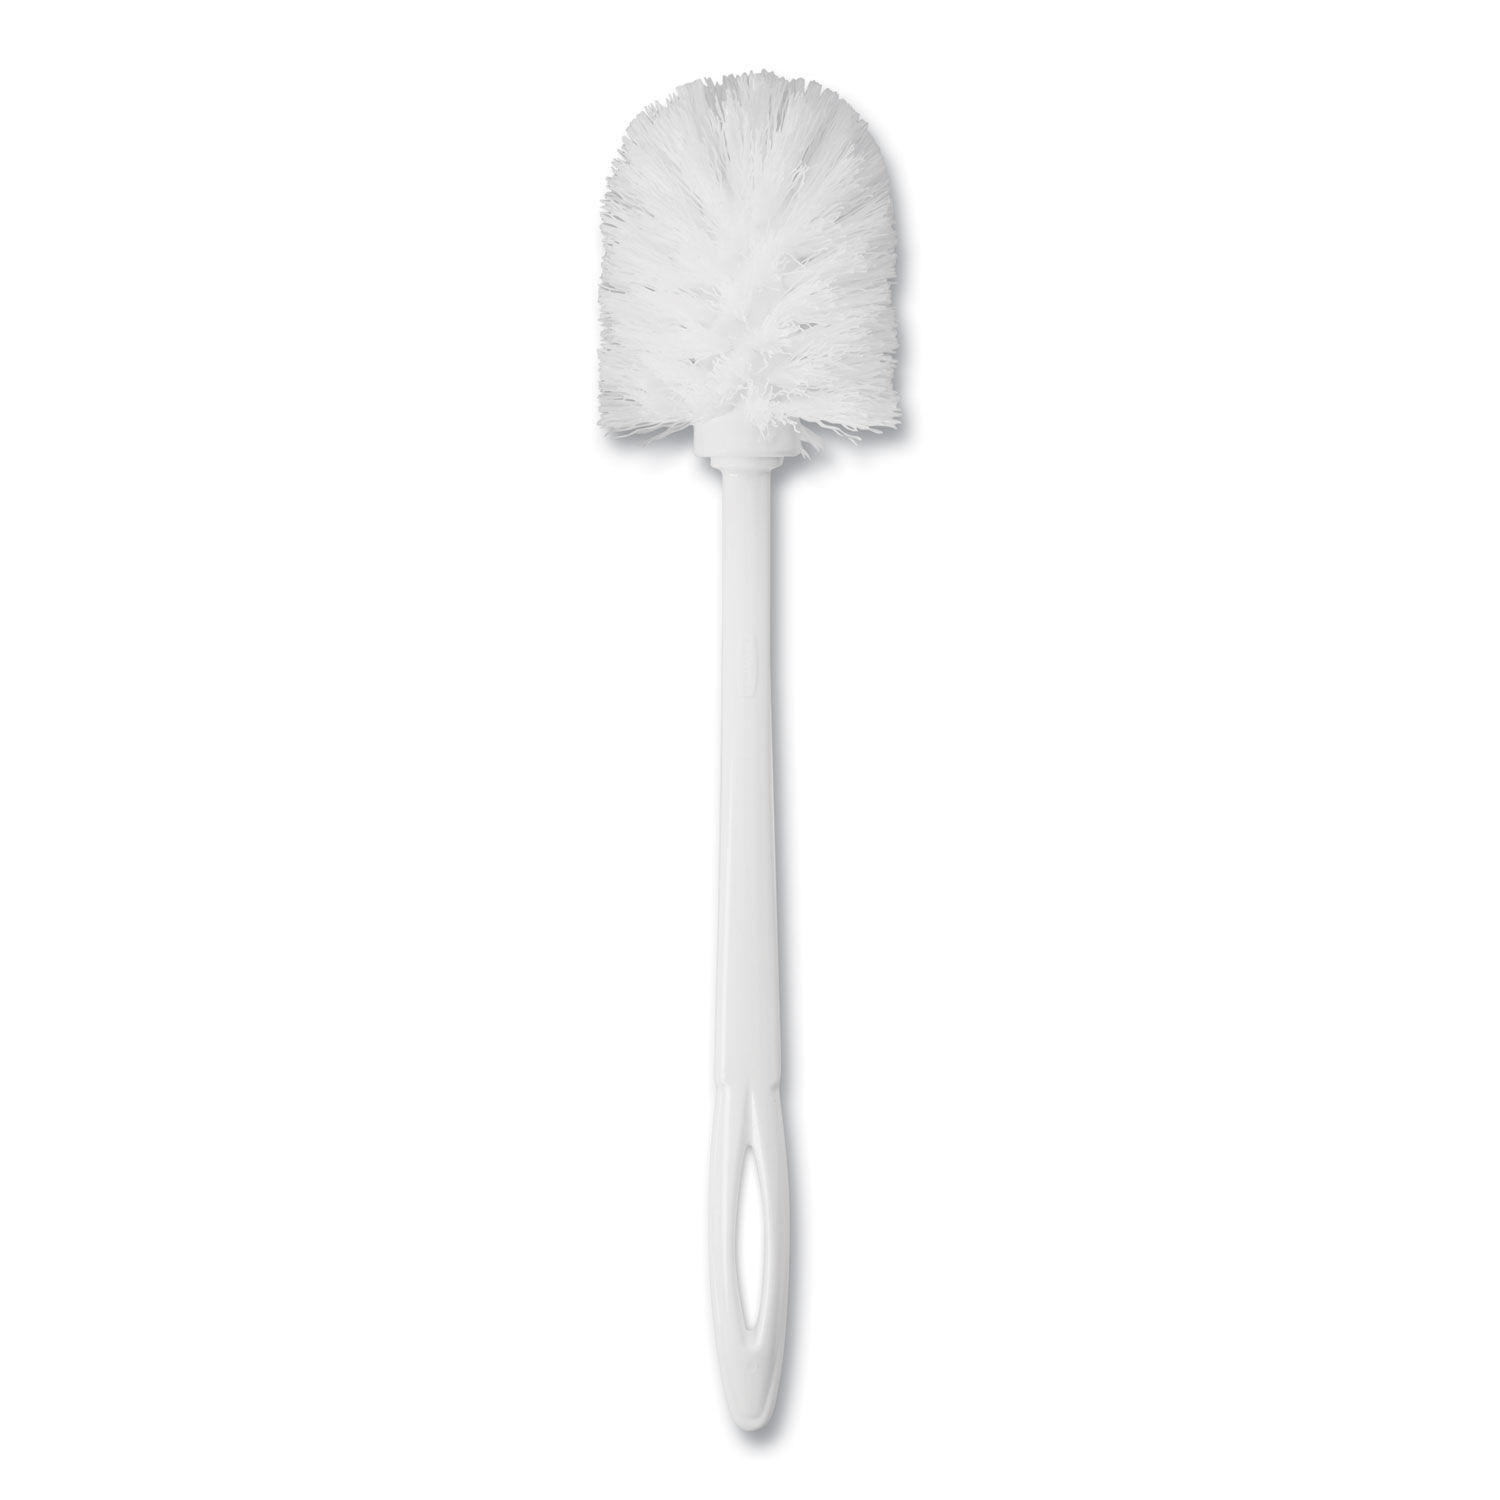 Rubbermaid Commercial Toilet Bowl Brush Holder - RCP631100CT